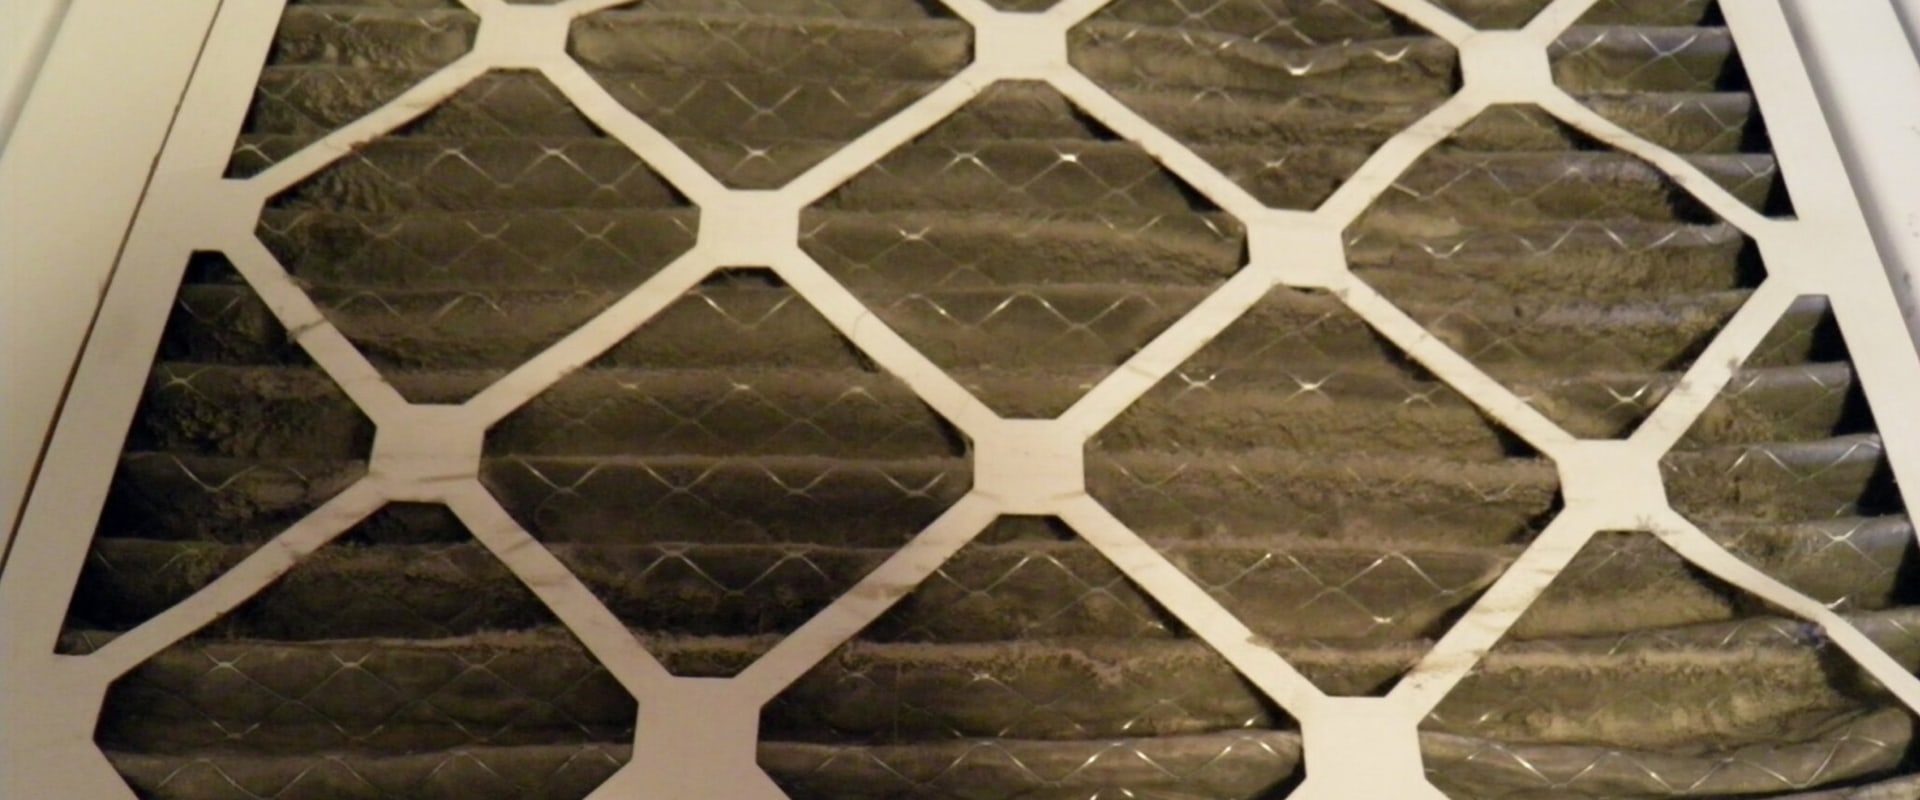 Saving Money On Your Heating Bill With A Clean 20x25x4 Furnace Filter And Regular HVAC Maintenance